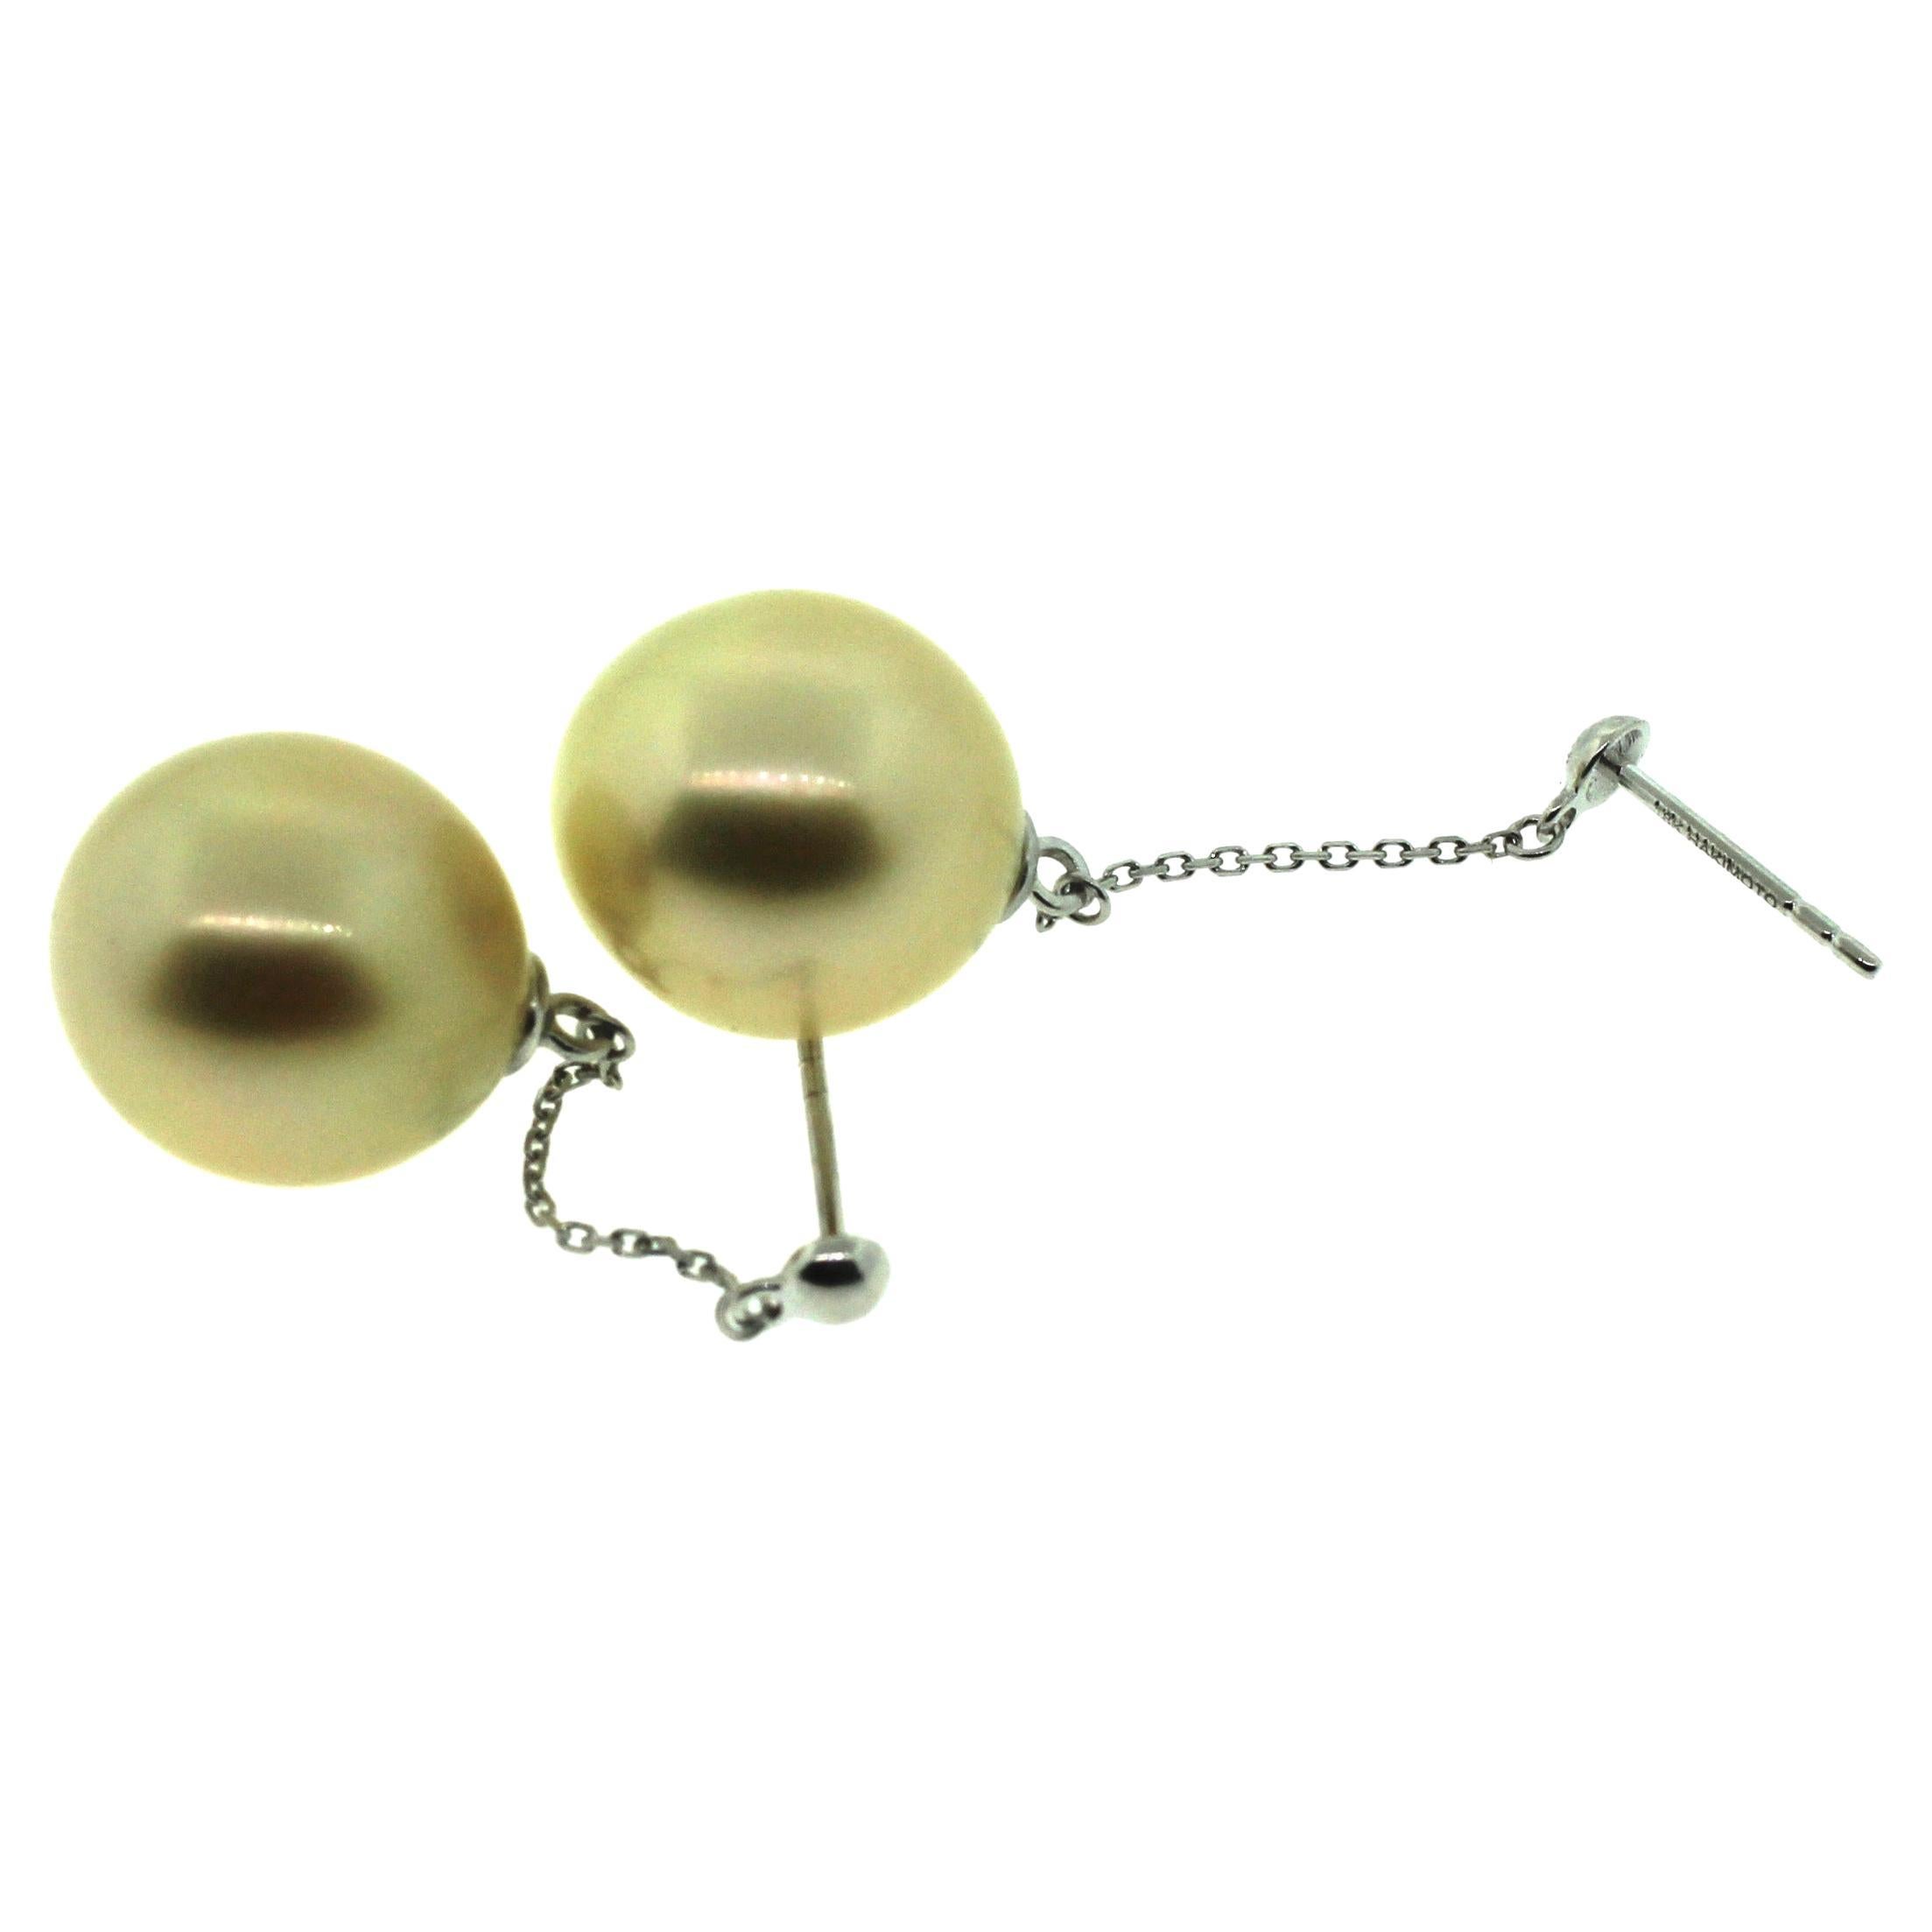 Hakimoto By Jewel Of Ocean
18K White Gold 
Natural Color Drop Cultured Pearl Earrings.
Total item weight 5.8 grams
12 mm Natural color South Sea Drop Cultured Pearls
18K White Gold High Polish
Orient: Very Good
Luster: Very Good
Nacre: Very Good